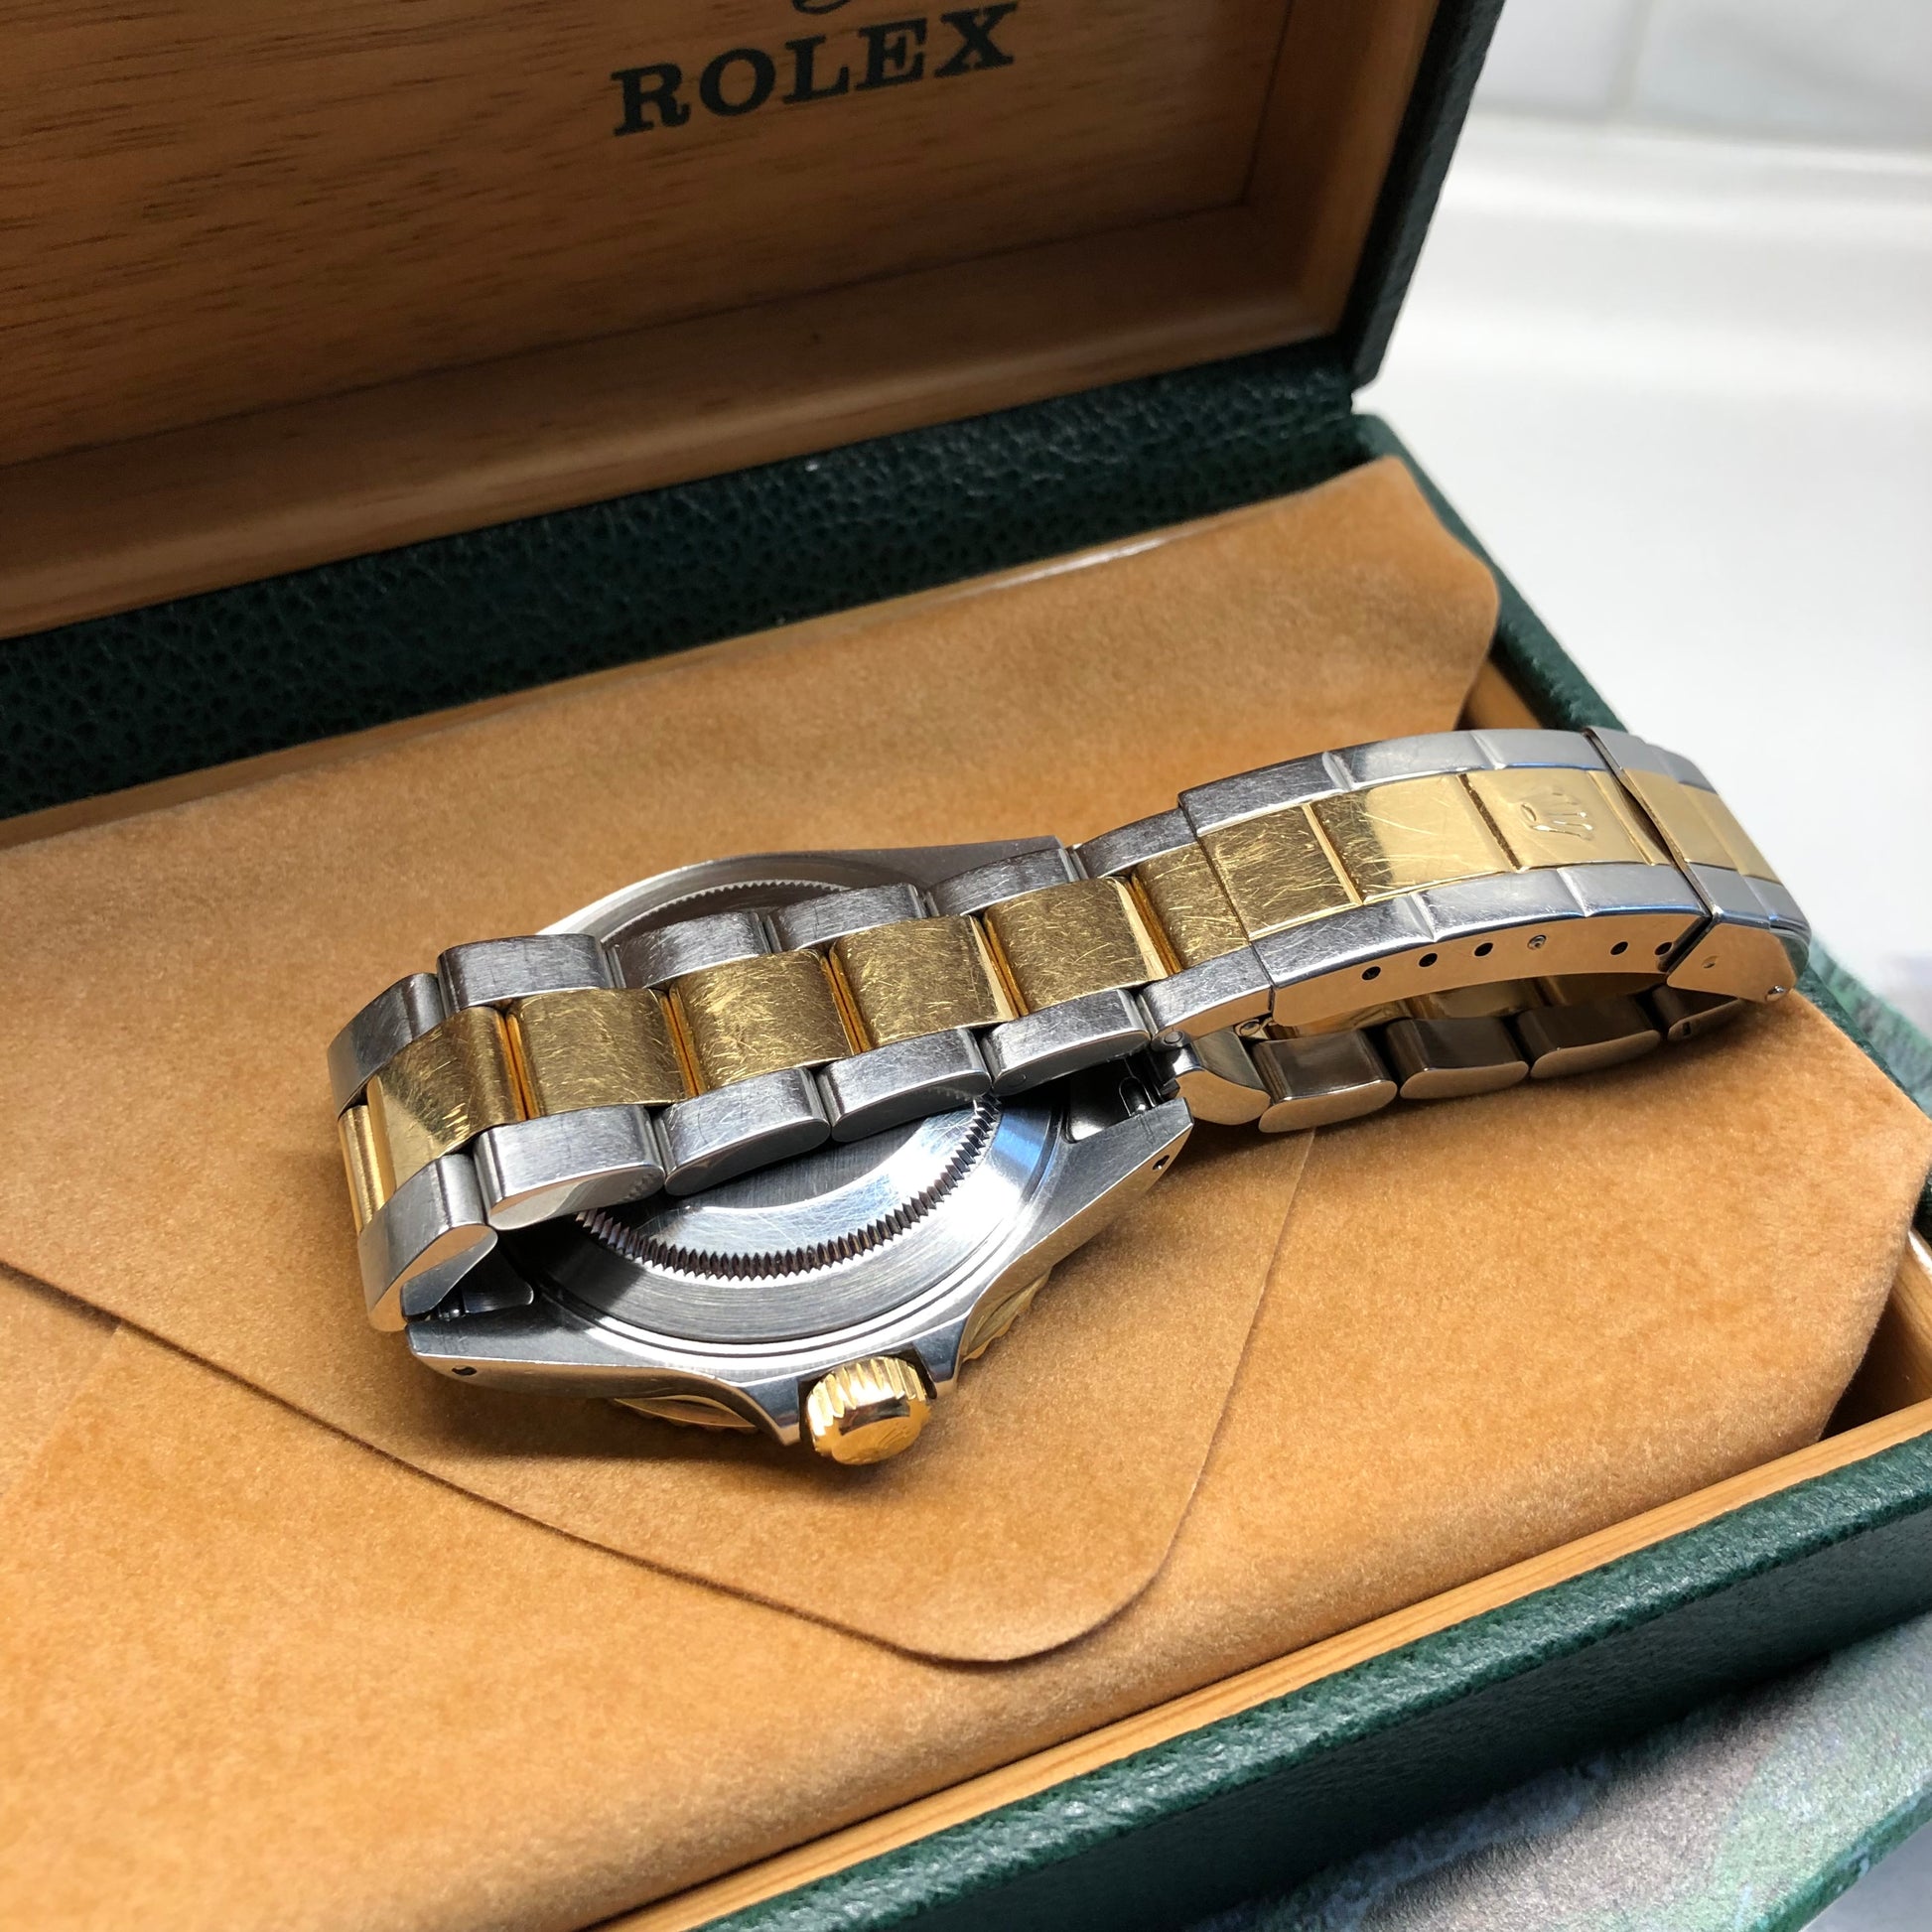 Rolex Submariner Oyster Perpetual Wrist Watch Iob Auction